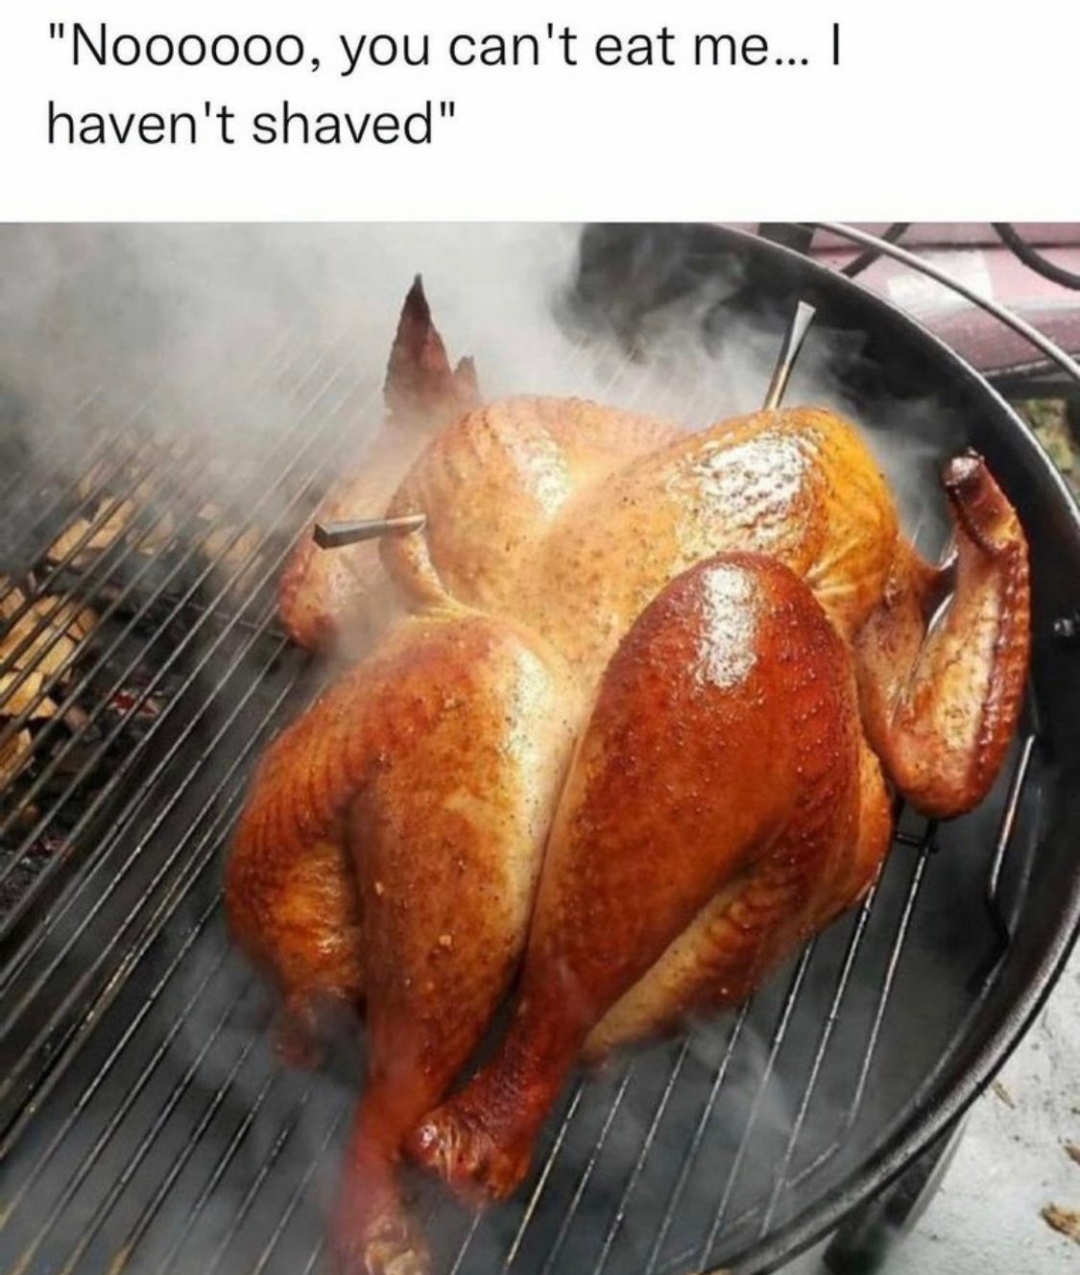 monday morning randomness - turkey i haven t shaved - "Noooooo, you can't eat me... I haven't shaved"